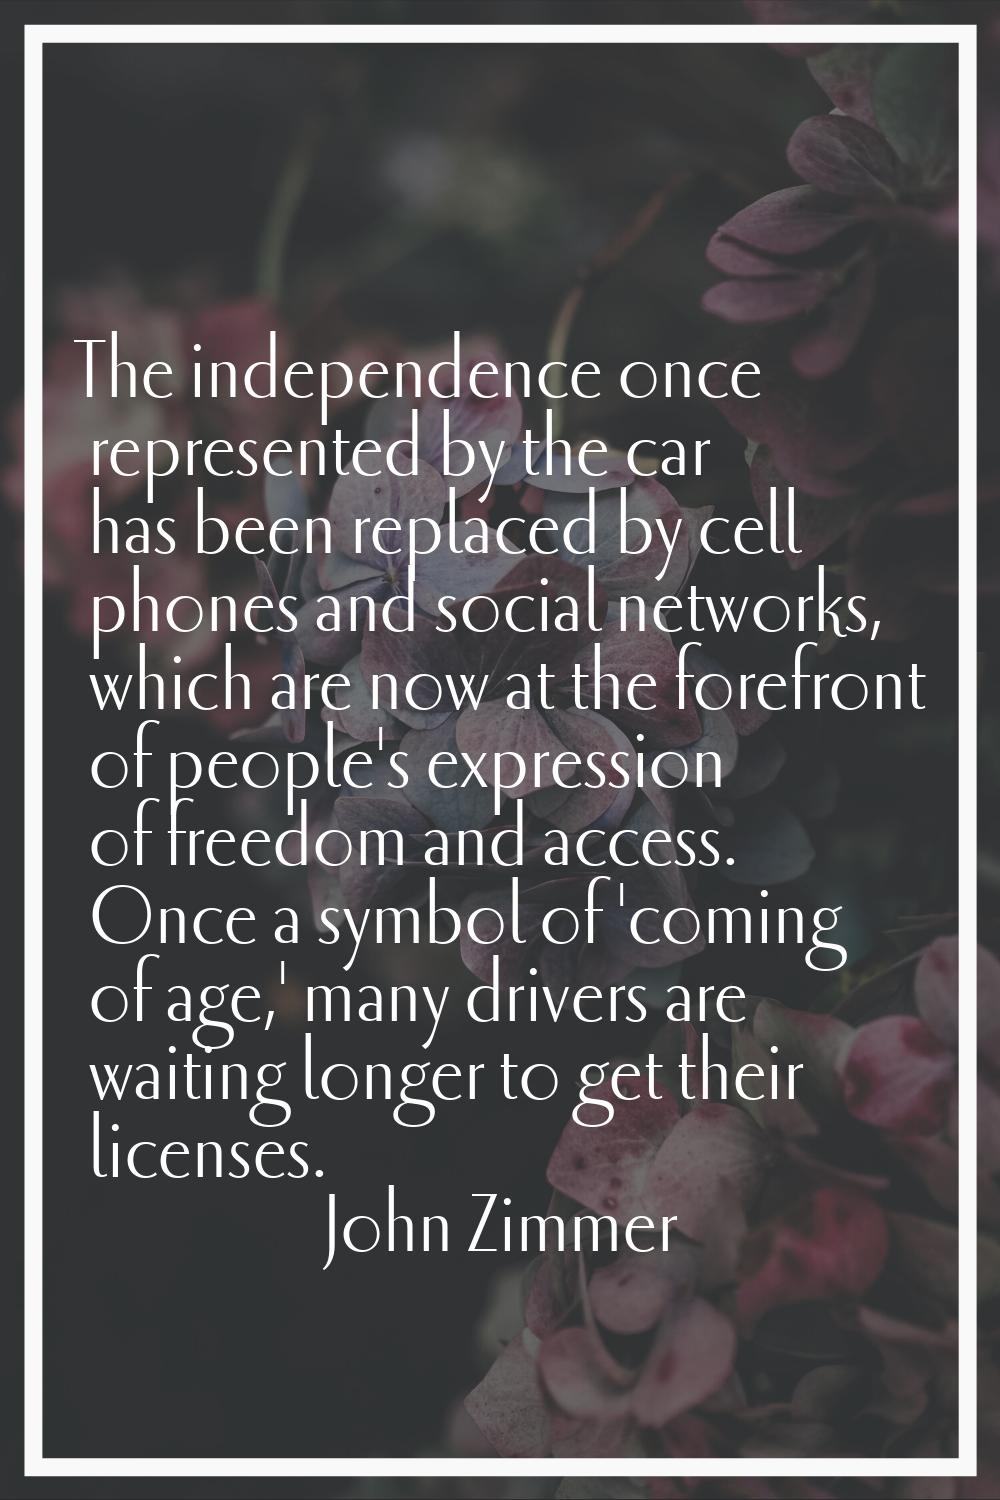 The independence once represented by the car has been replaced by cell phones and social networks, 